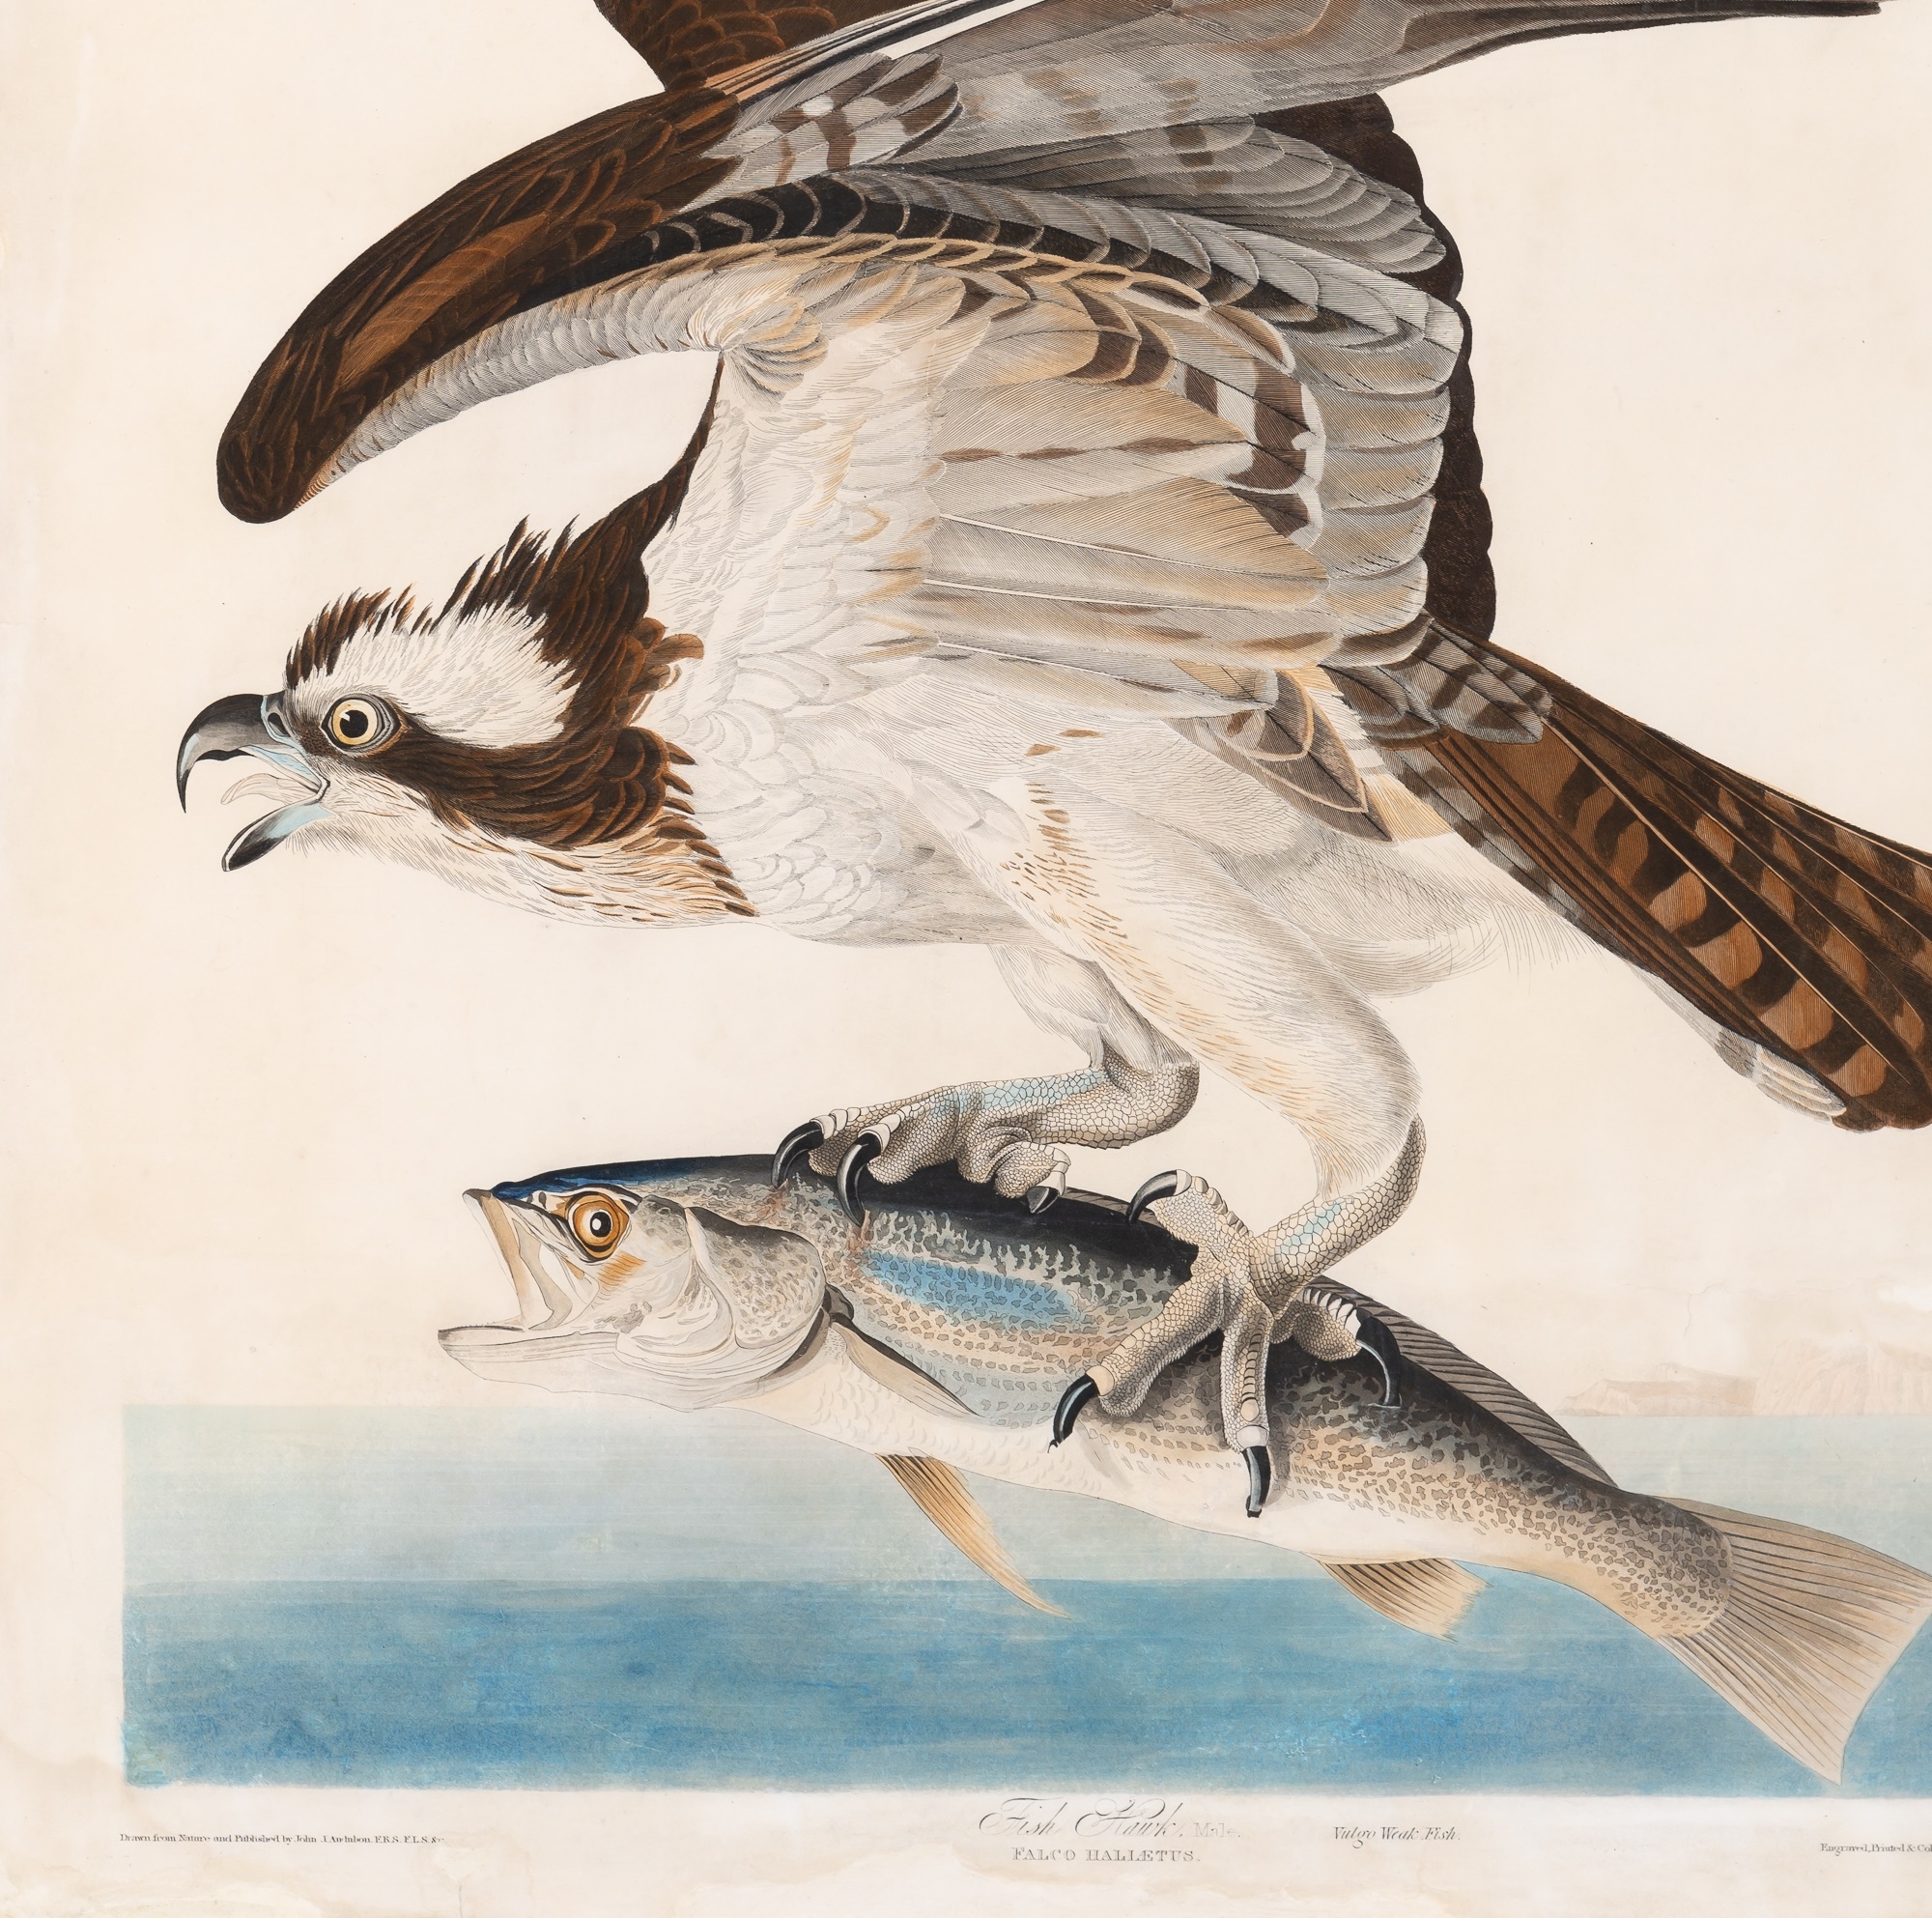 Artwork by John James Audubon, The Birds of America, Made of Hand-colored aquatint, engraving and etching on wove paper